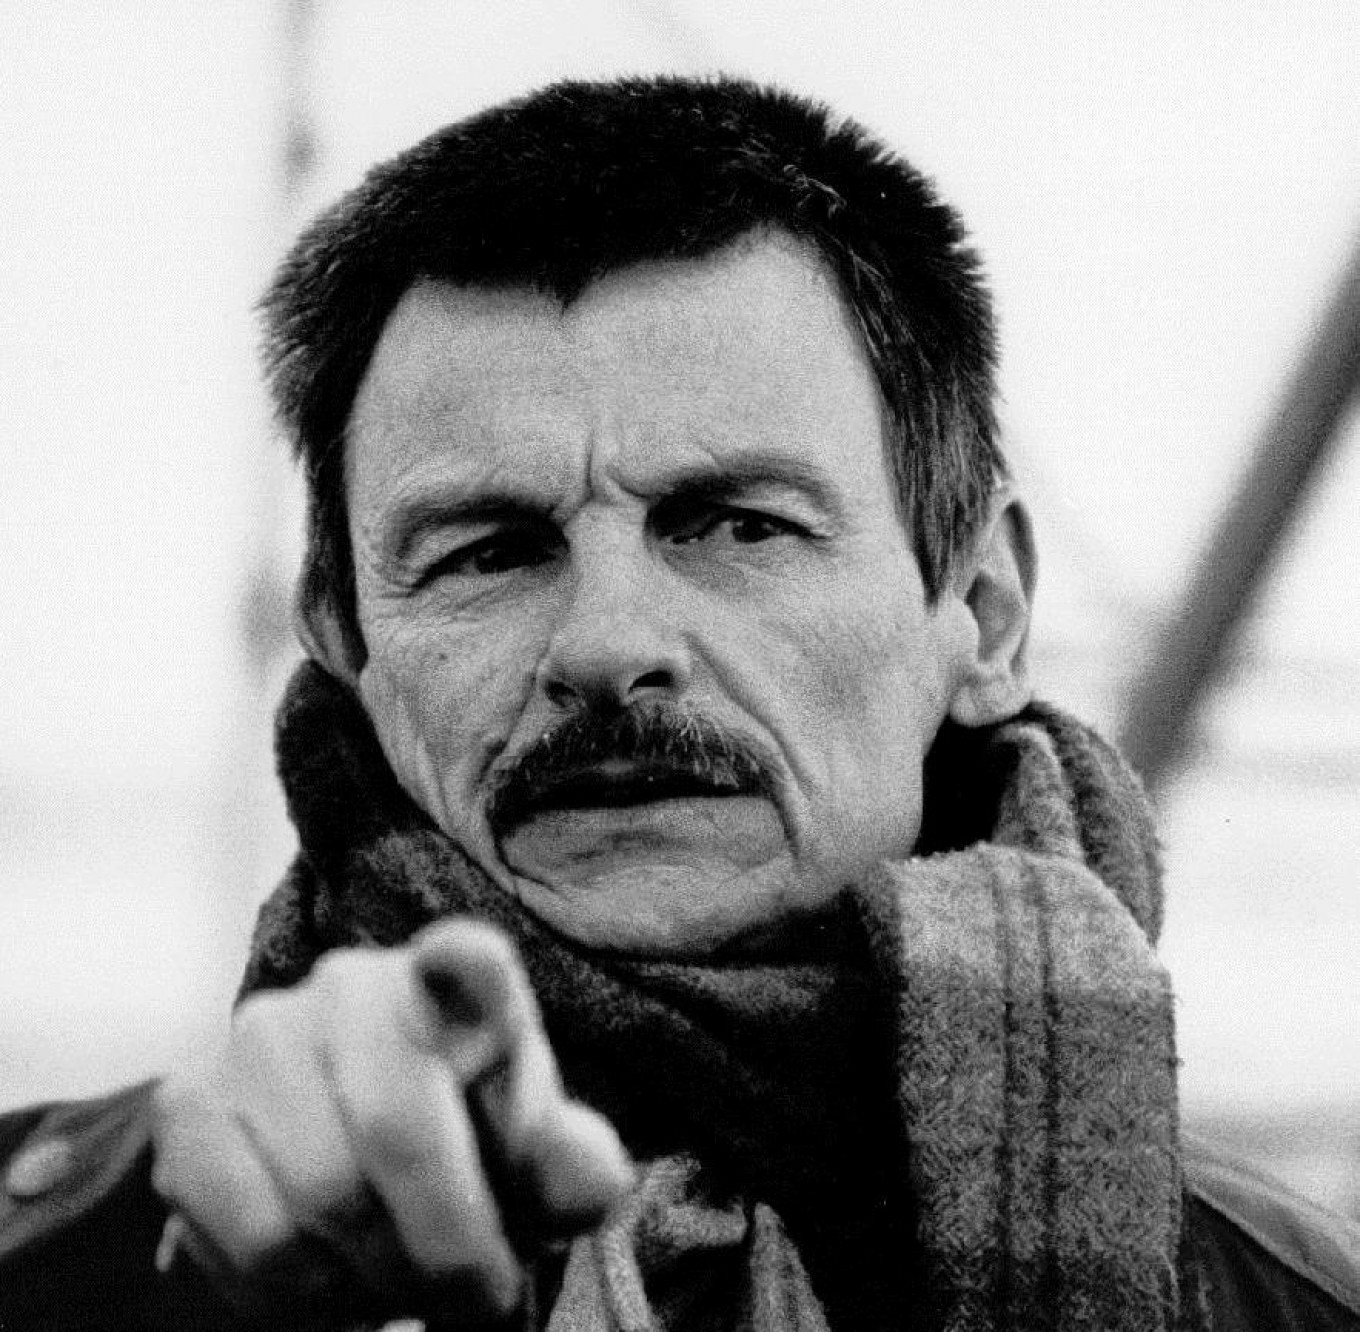 
					Andrei Tarkovsky would have been 85 years old this year, and his masterpiece "Andrei Rublev" was released 50 years ago.					 					Festival de Cine Africano de Córdoba				